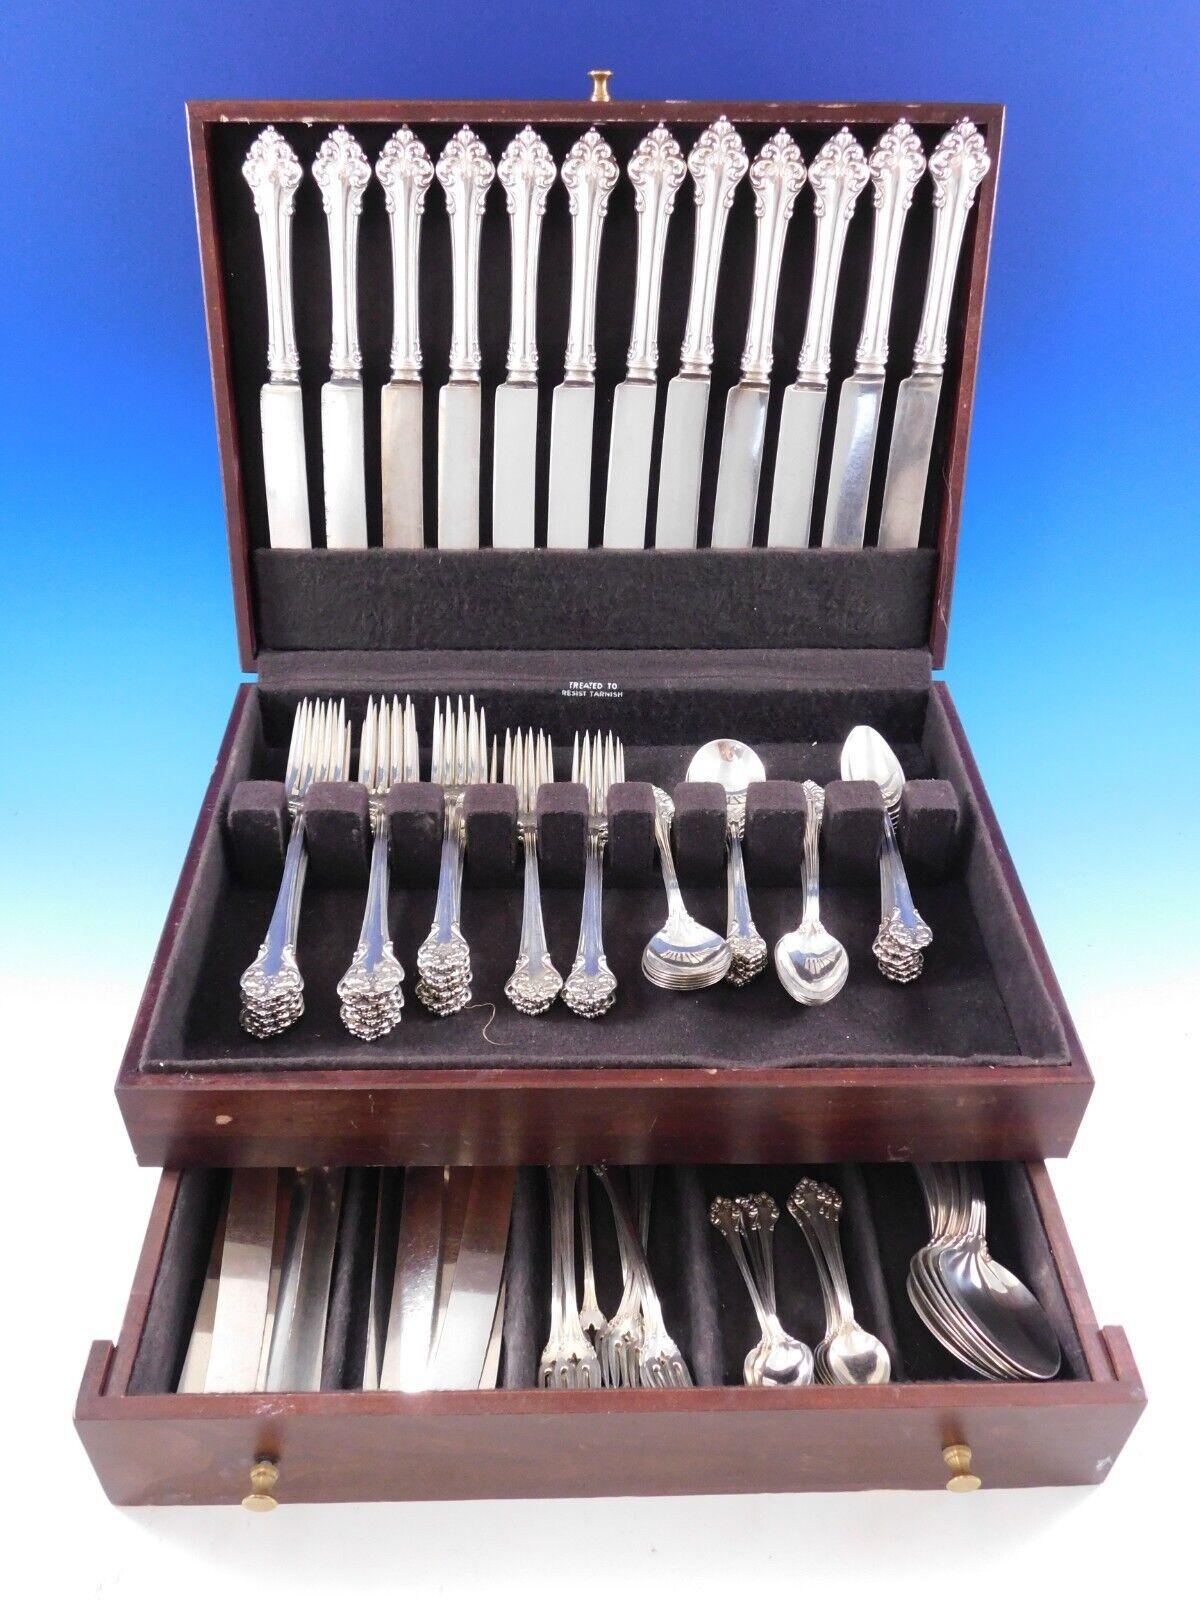 Outstanding monumental dinner and Luncheon Elegante by Reed and Barton sterling silver Flatware set, 102 pieces. This set includes:

12 dinner size knives, blunt, 10